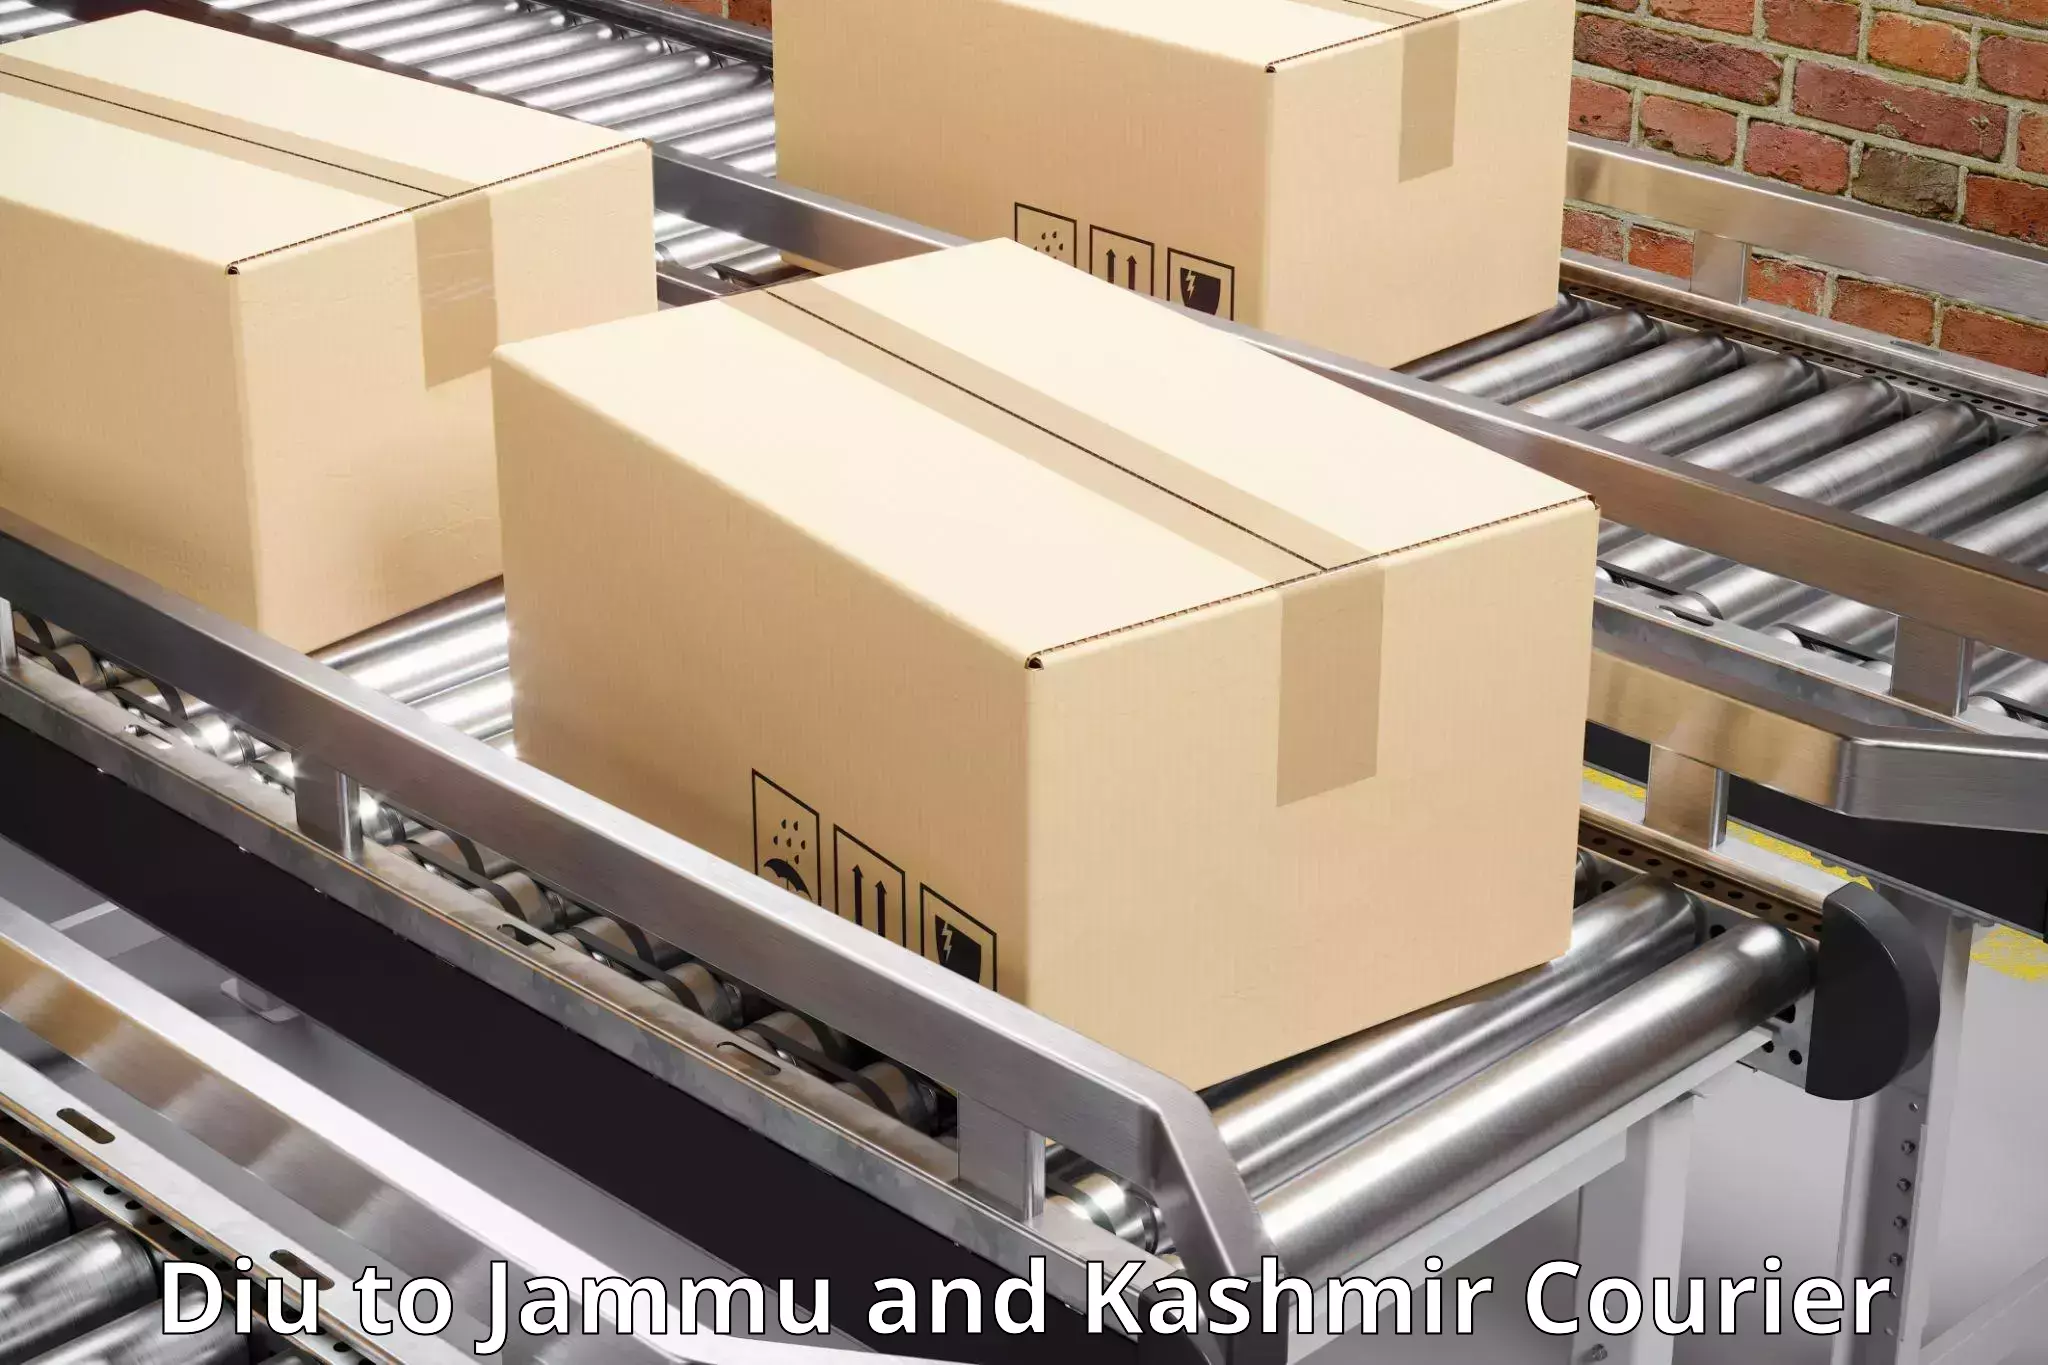 Weekend courier service Diu to Baramulla